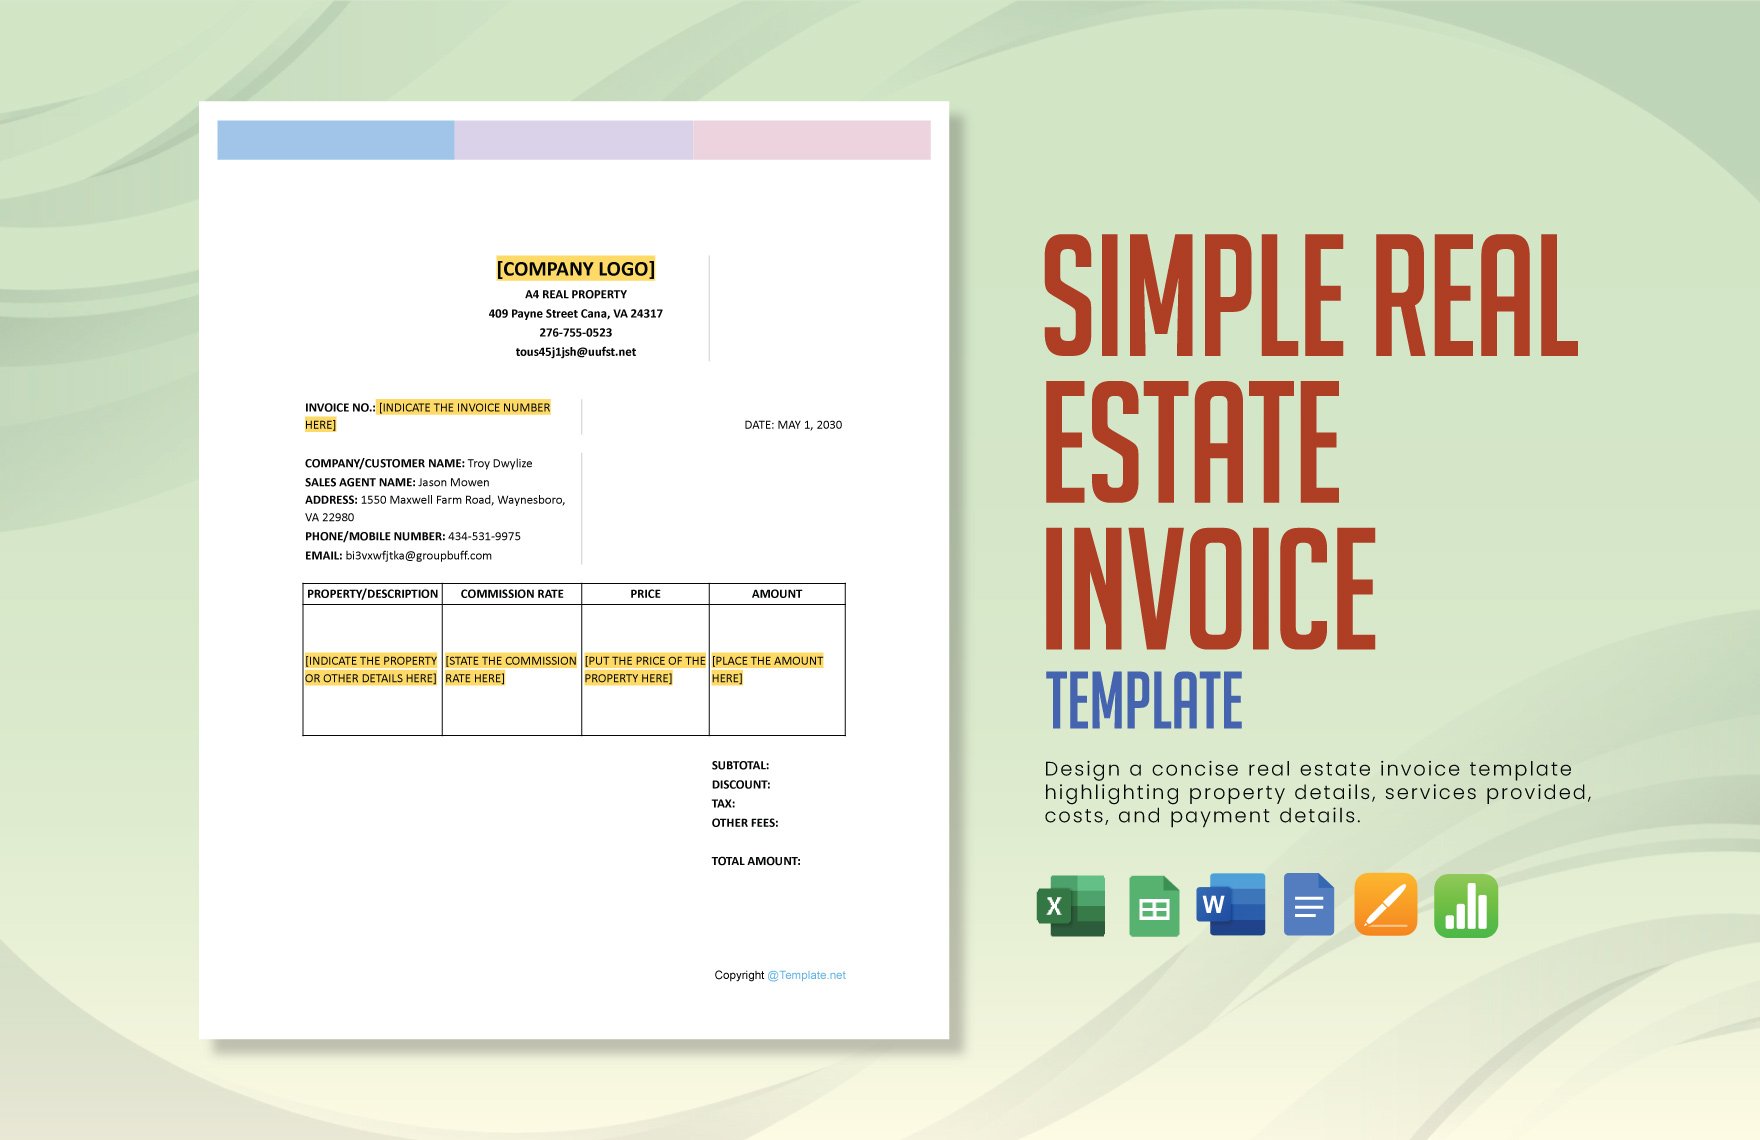 Free Simple Real Estate Invoice Template in Word, Google Docs, Excel, Google Sheets, Apple Pages, Apple Numbers